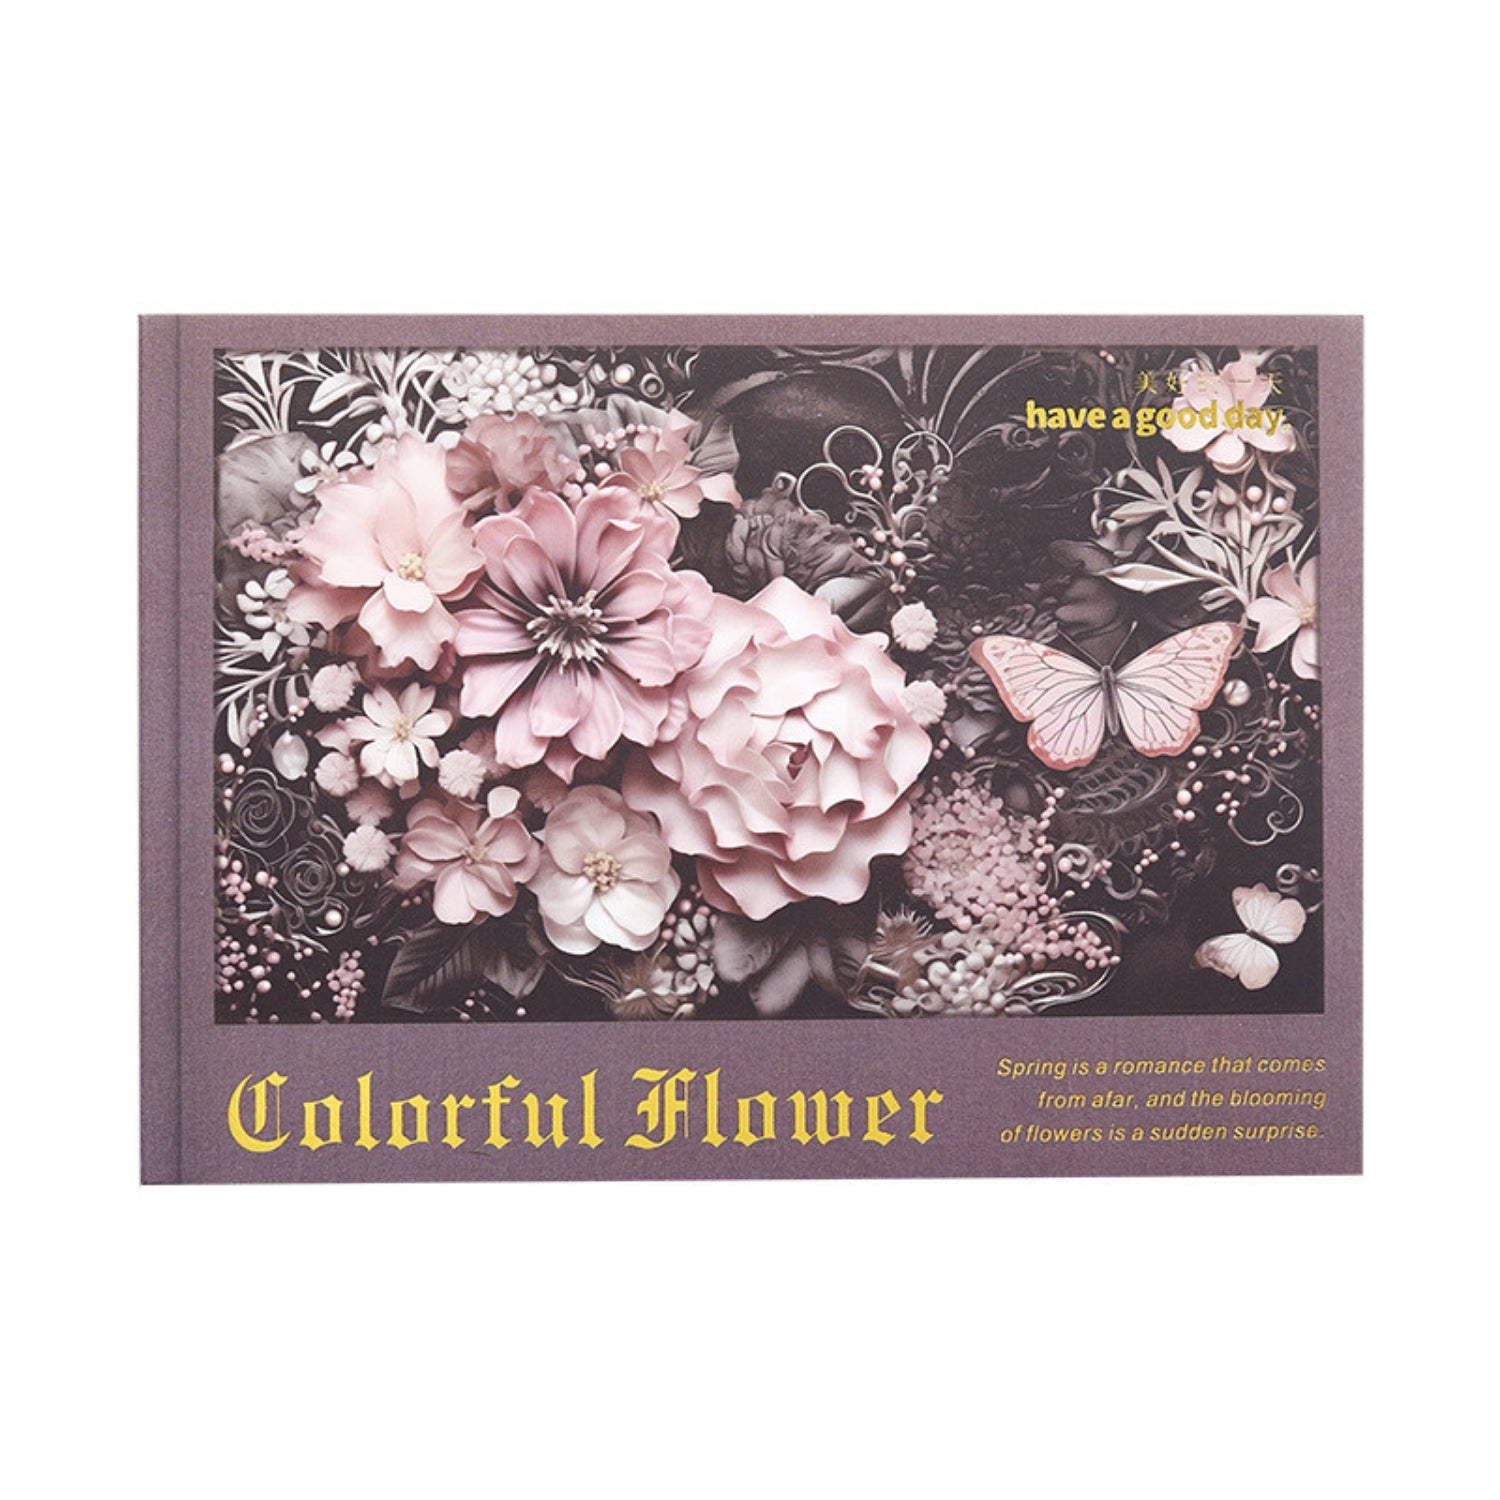 Colorful Flower Language Series Flower Material Book 1